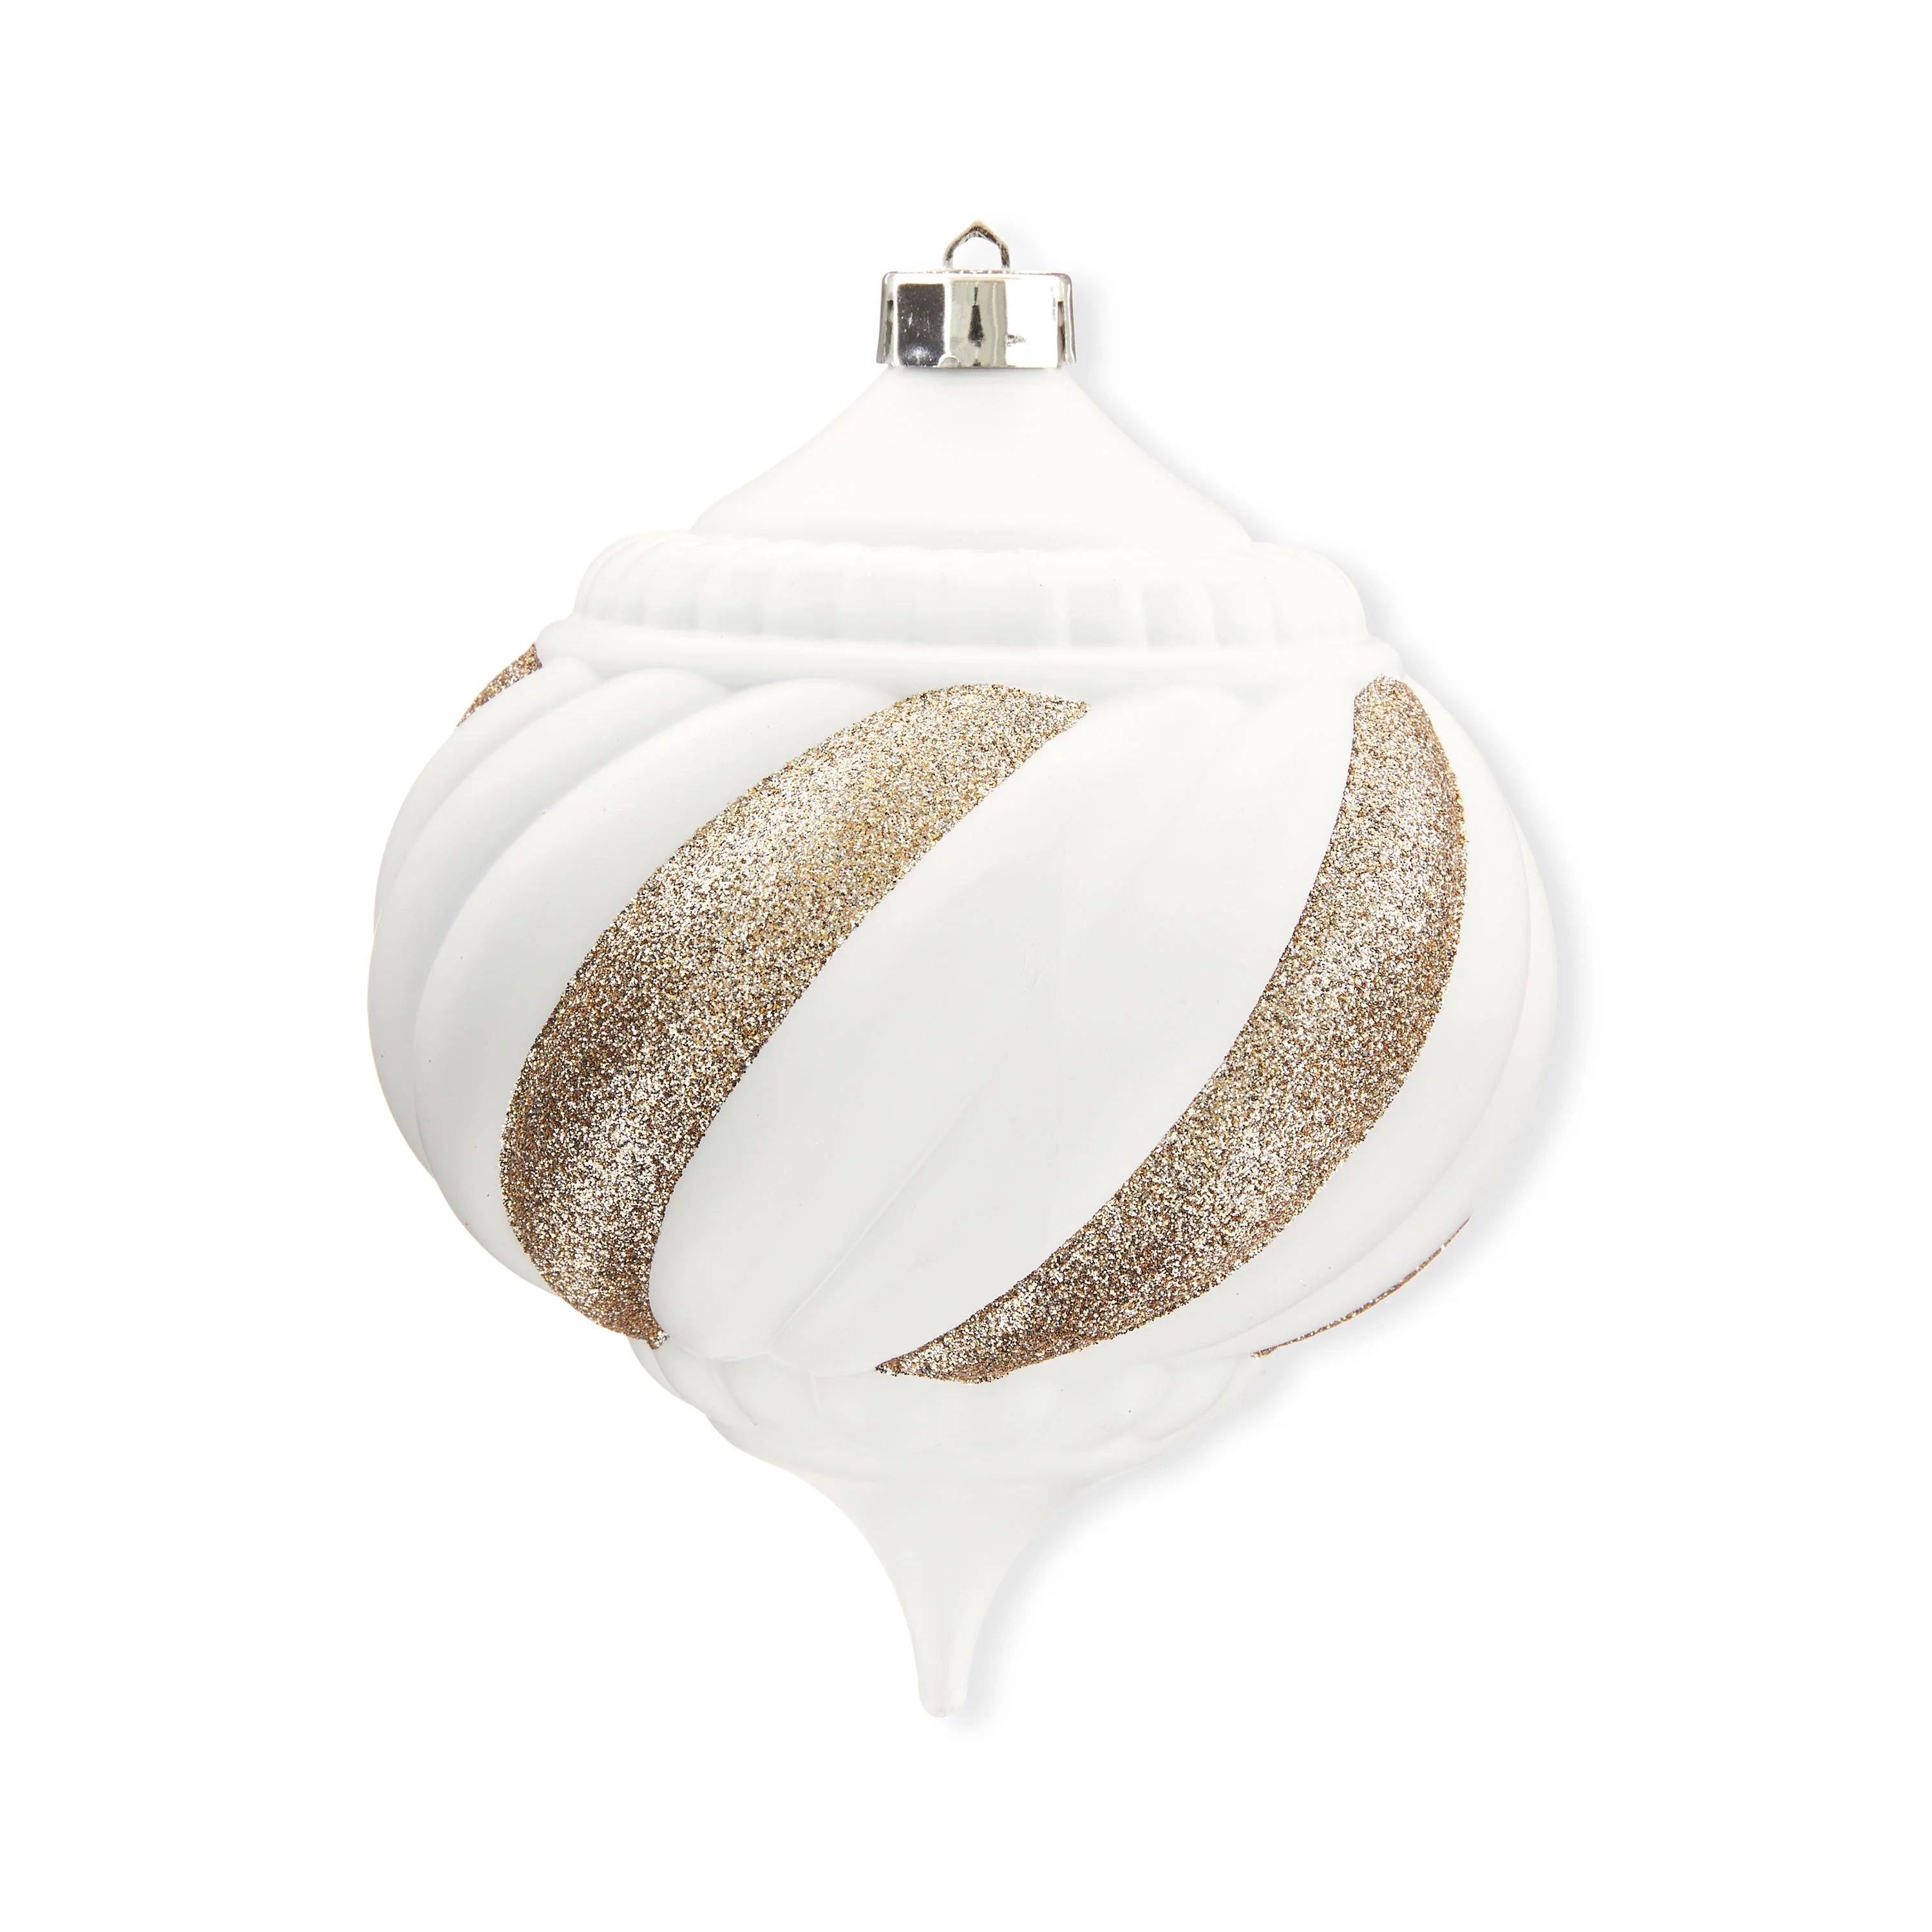 Matte Arctic White with Gold Swirl 150mm Jumbo Shatterproof Christmas Ornament, by Holiday Time | Walmart (US)